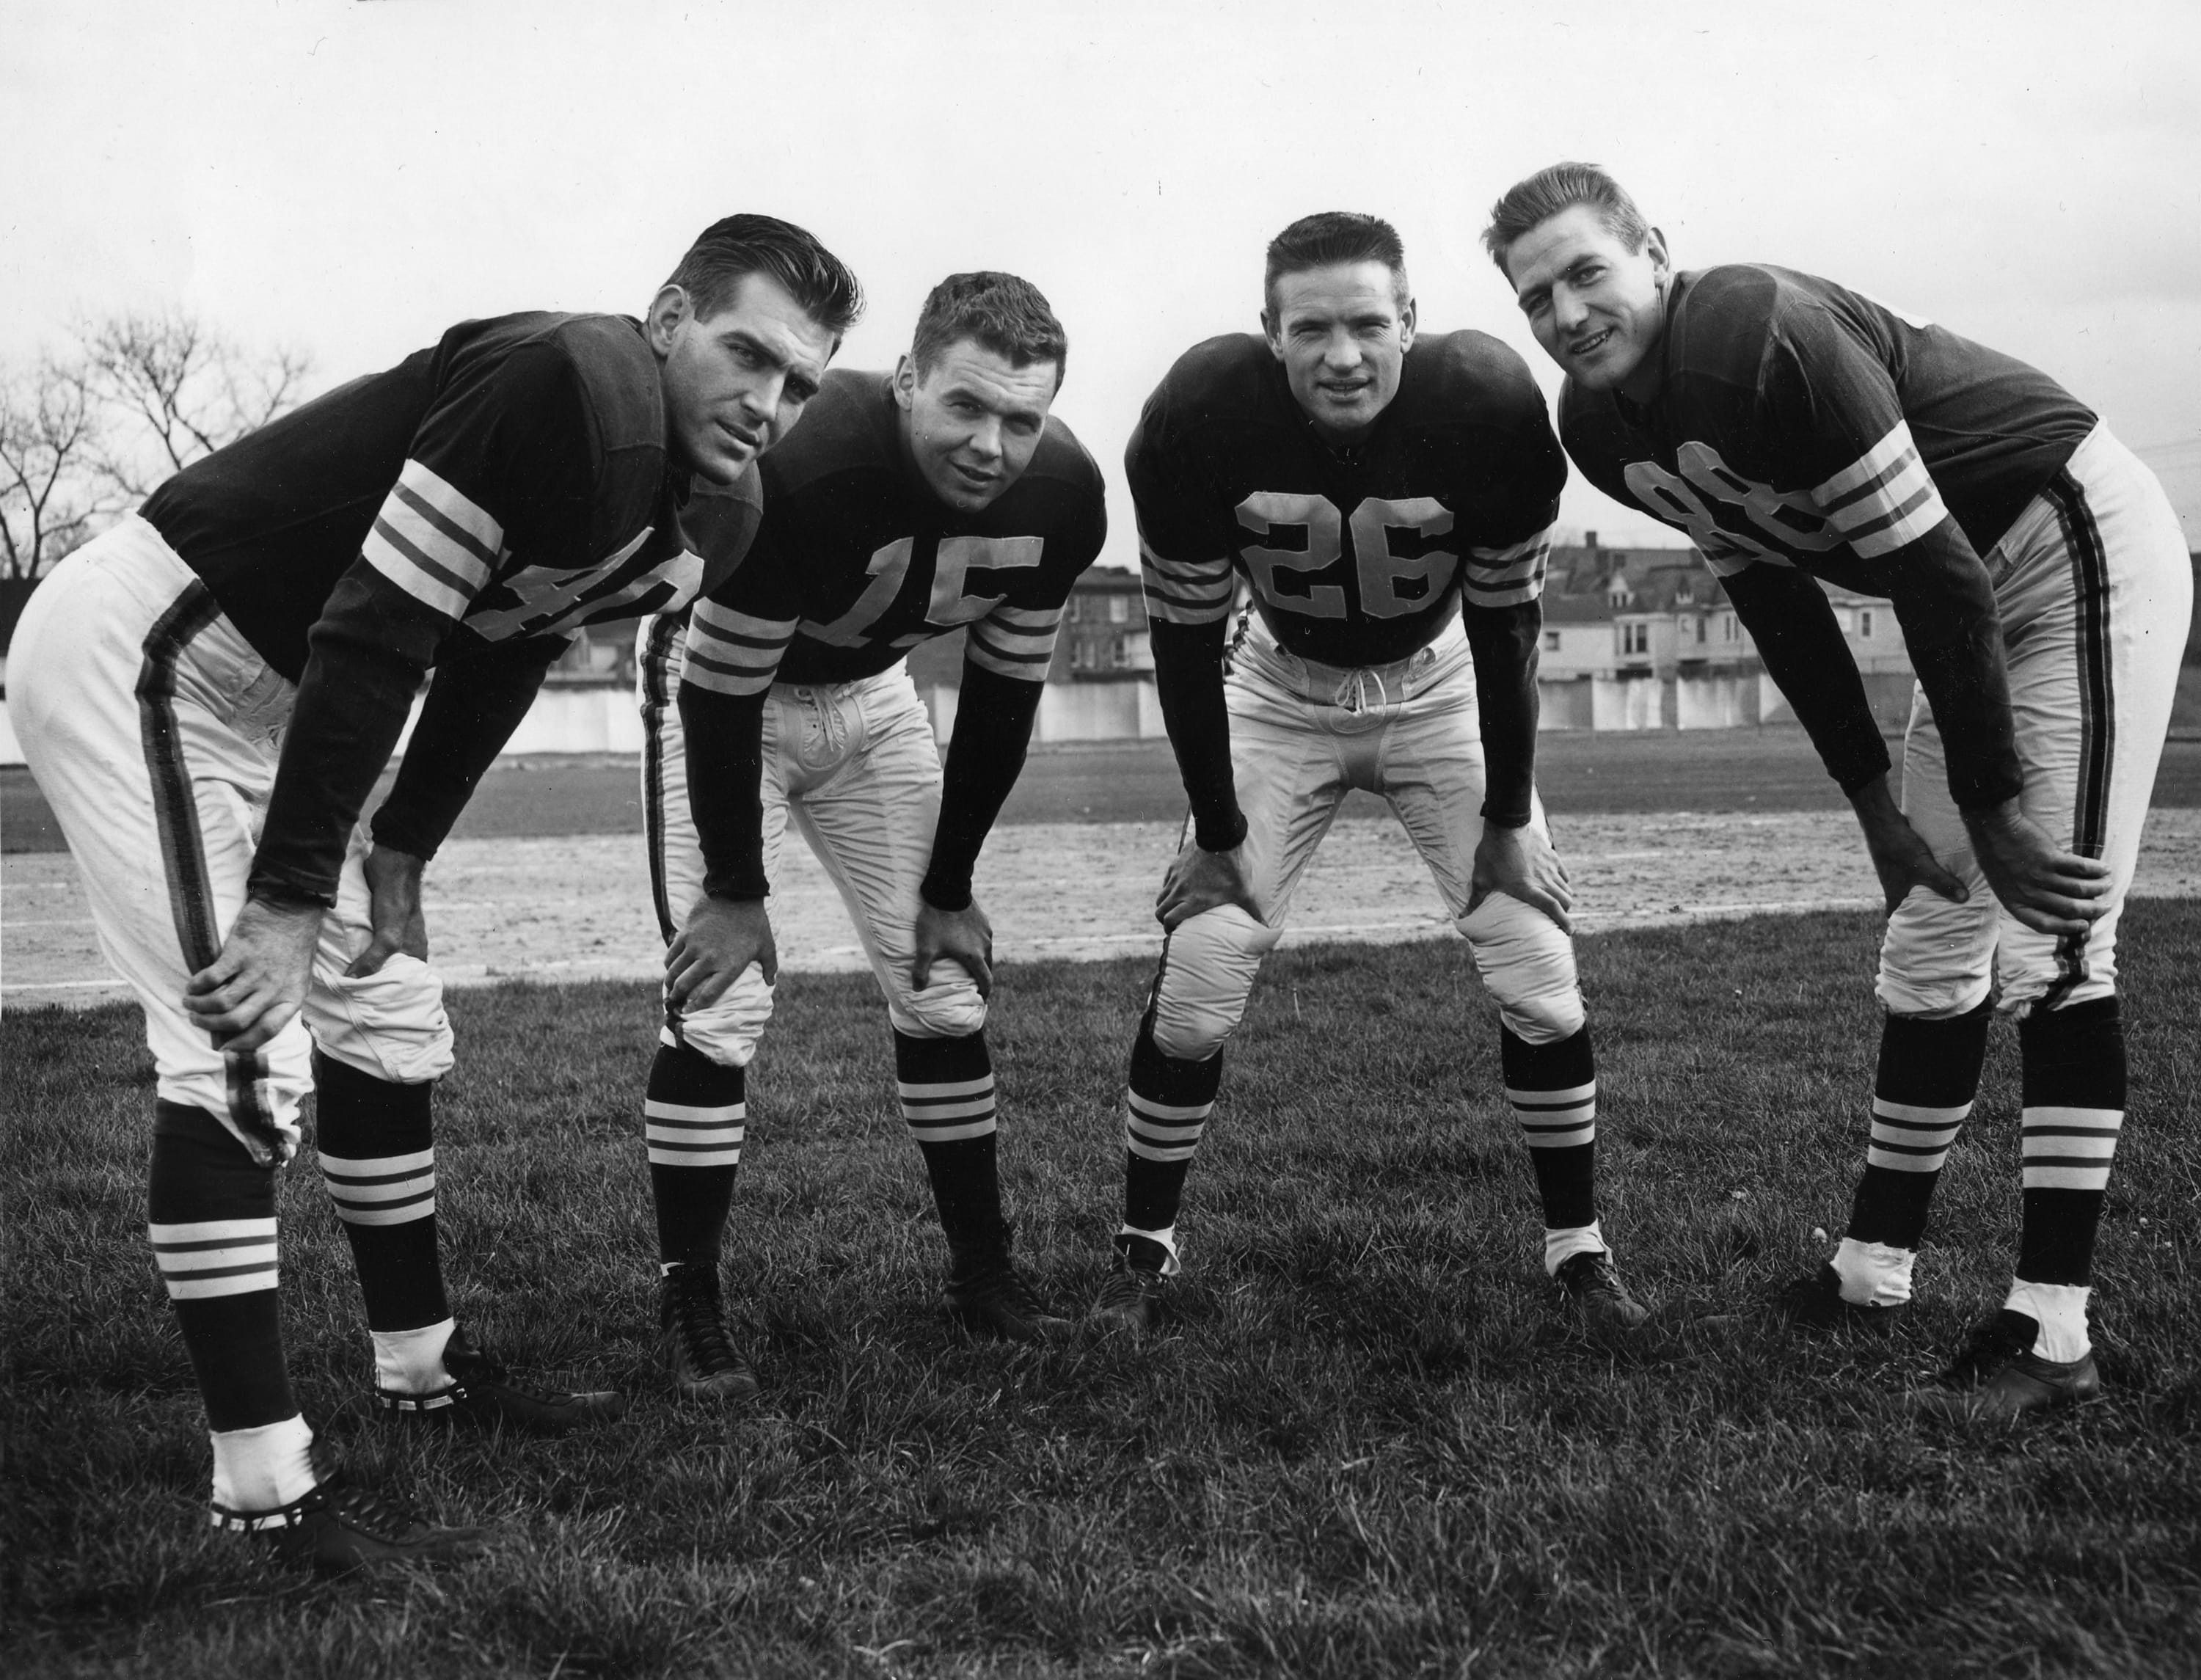 Cleveland Browns players (from left to right) Preston Carpenter, Tom O'Connell, Ray Renfro and Darrell Brewster in 1950.